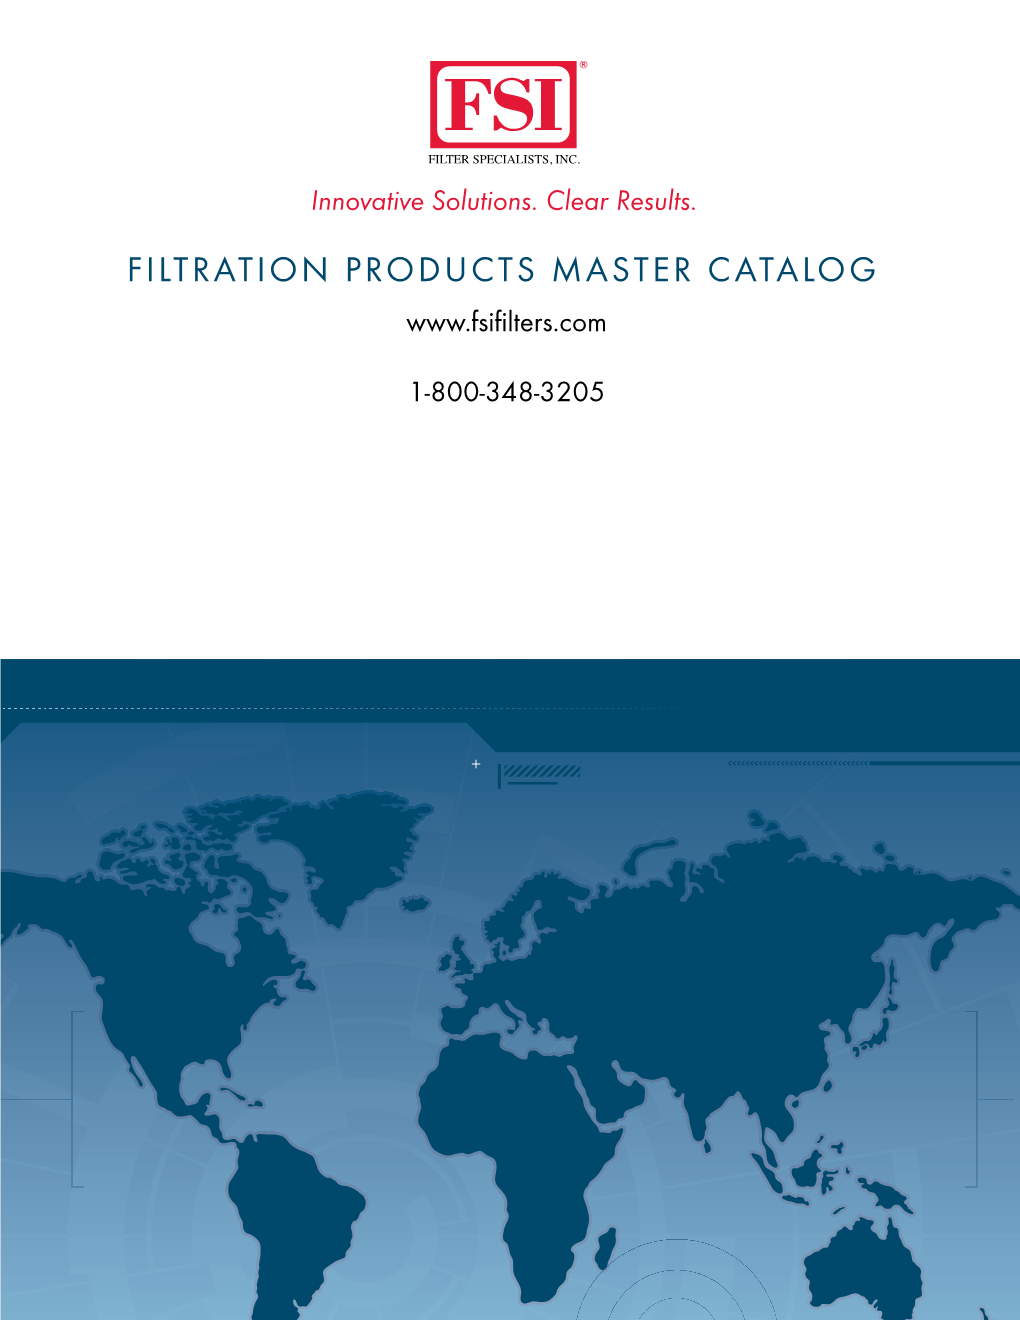 Filtration Products Master Catalog